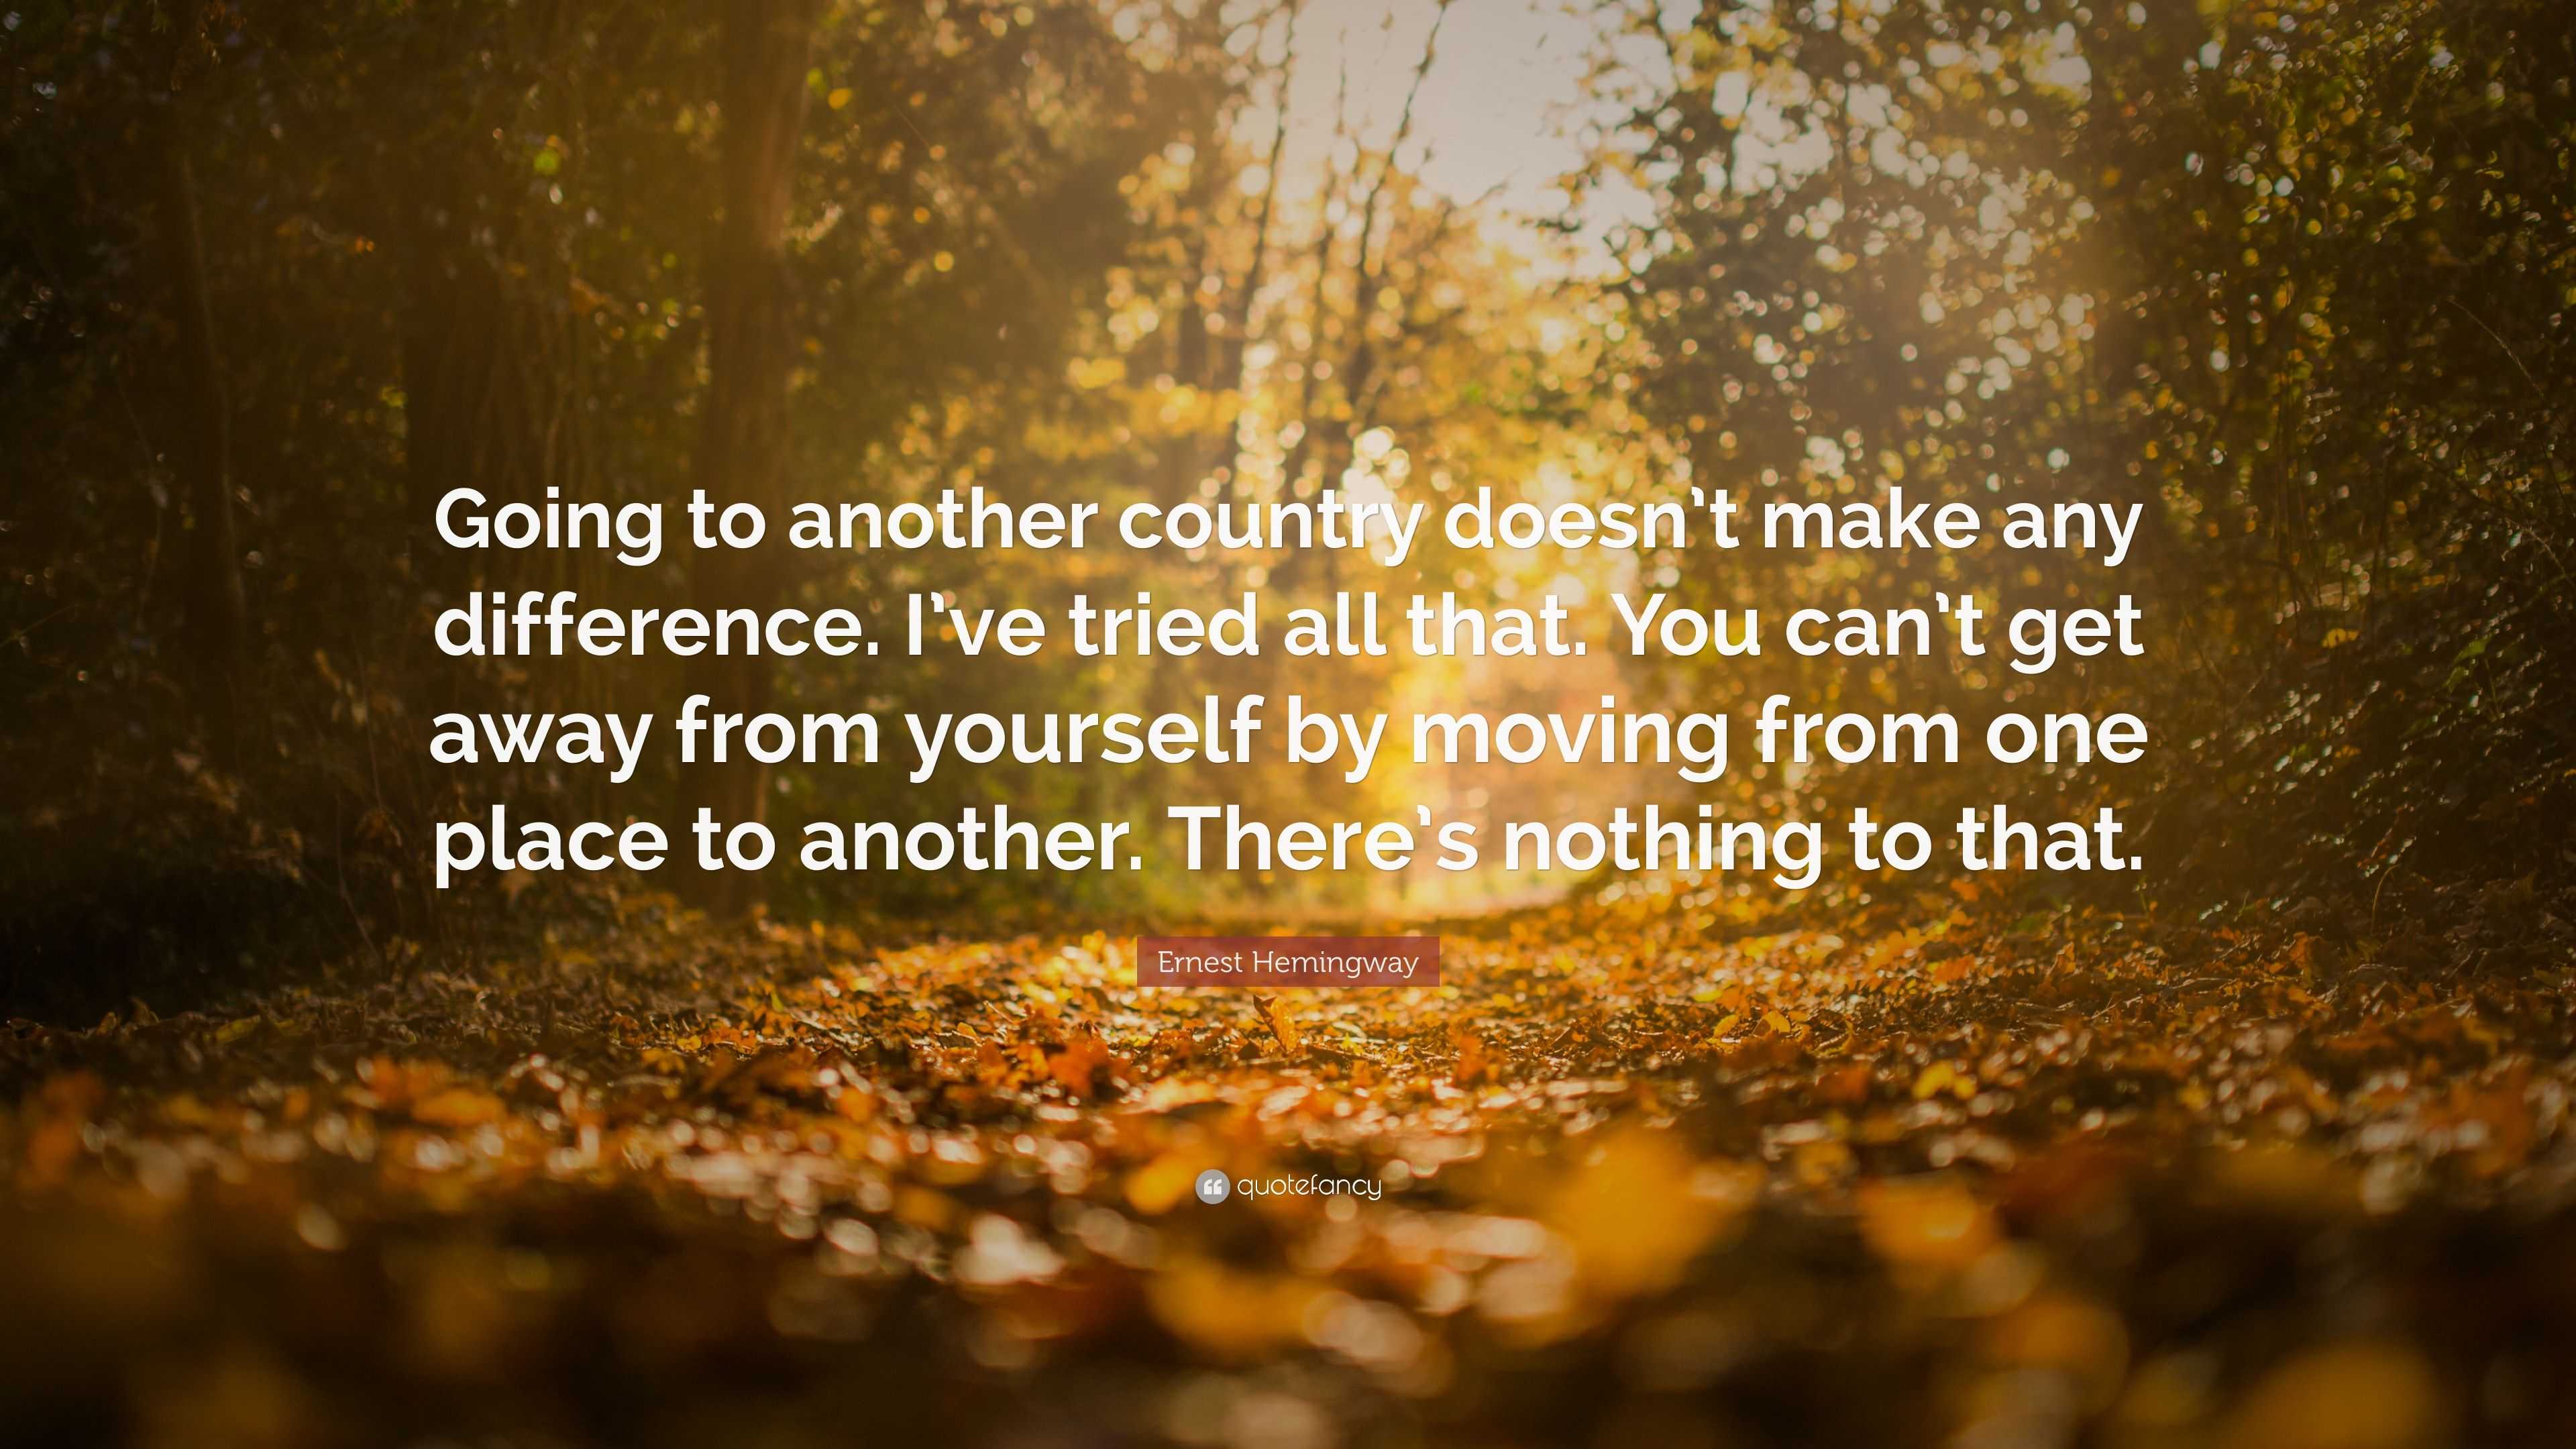 Ernest Hemingway Quote: “Going to another country doesn